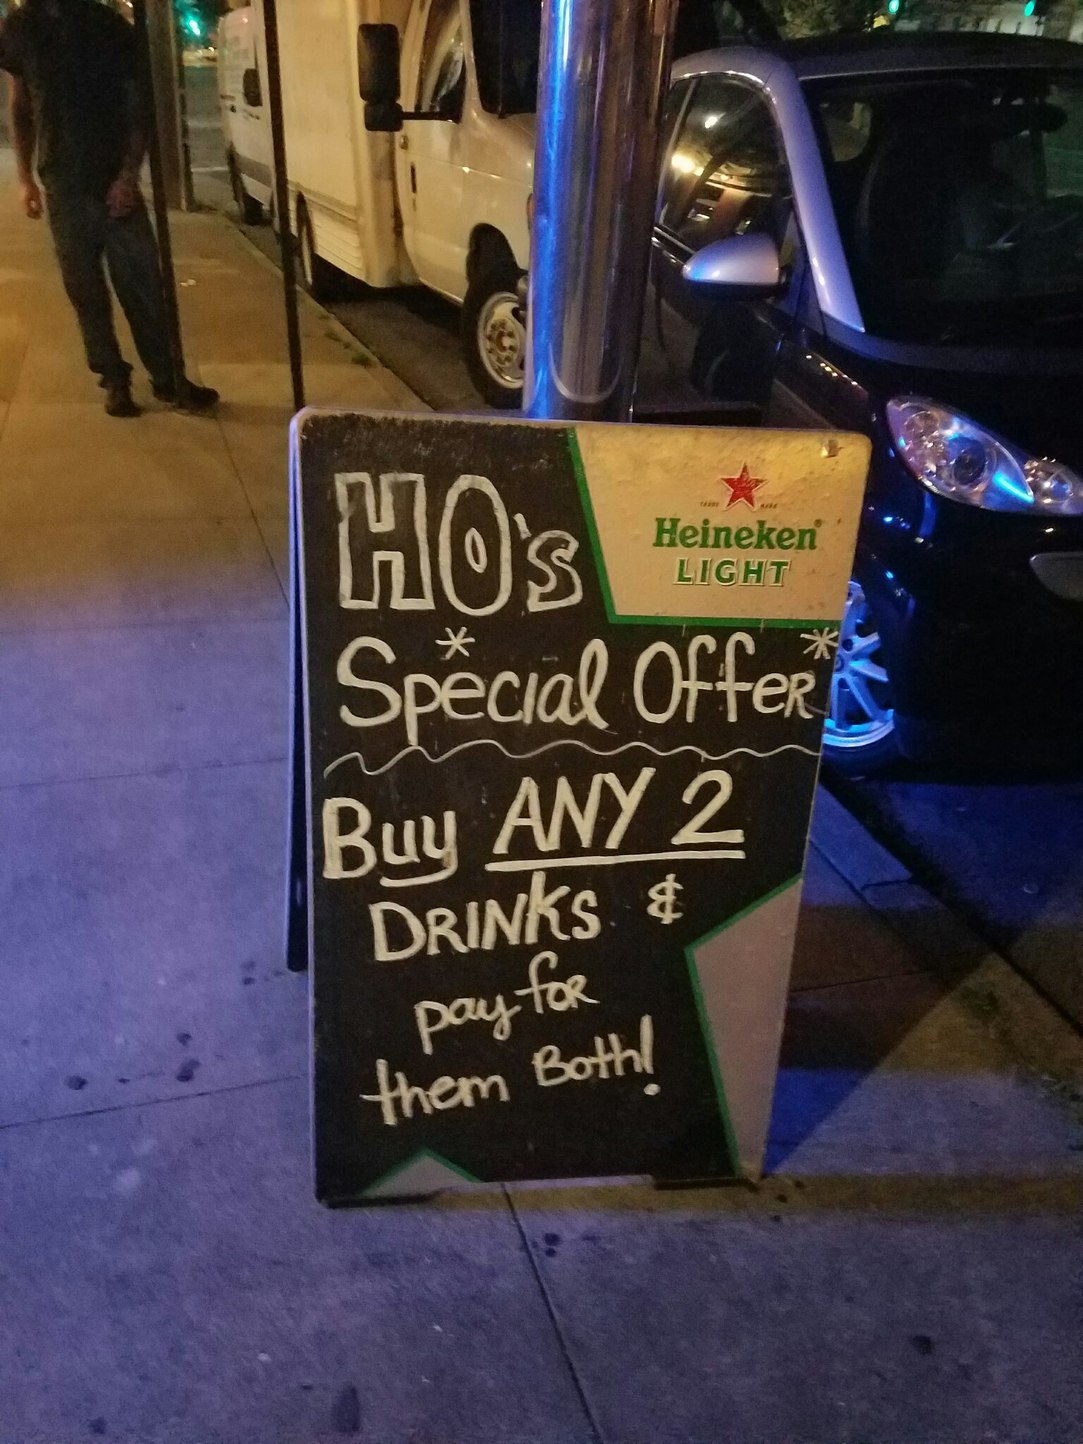 What a deal! Ho's Bootleg Tavern in San Francisco. Took this picture myself! - meme